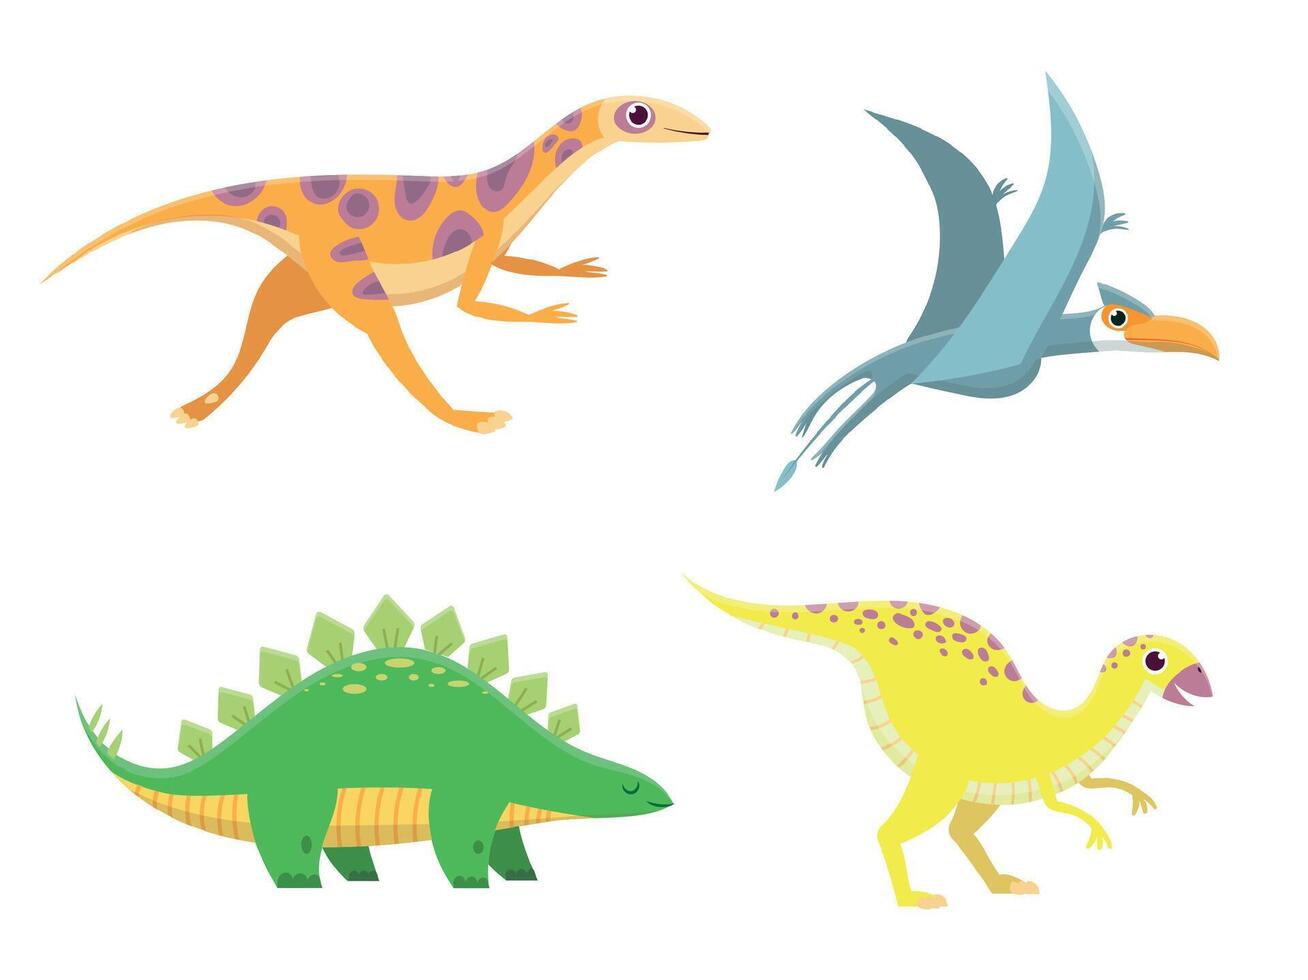 Cute baby dinosaurs. Funny cartoon dino running, standing and flying. Friendly colorful characters for children vector